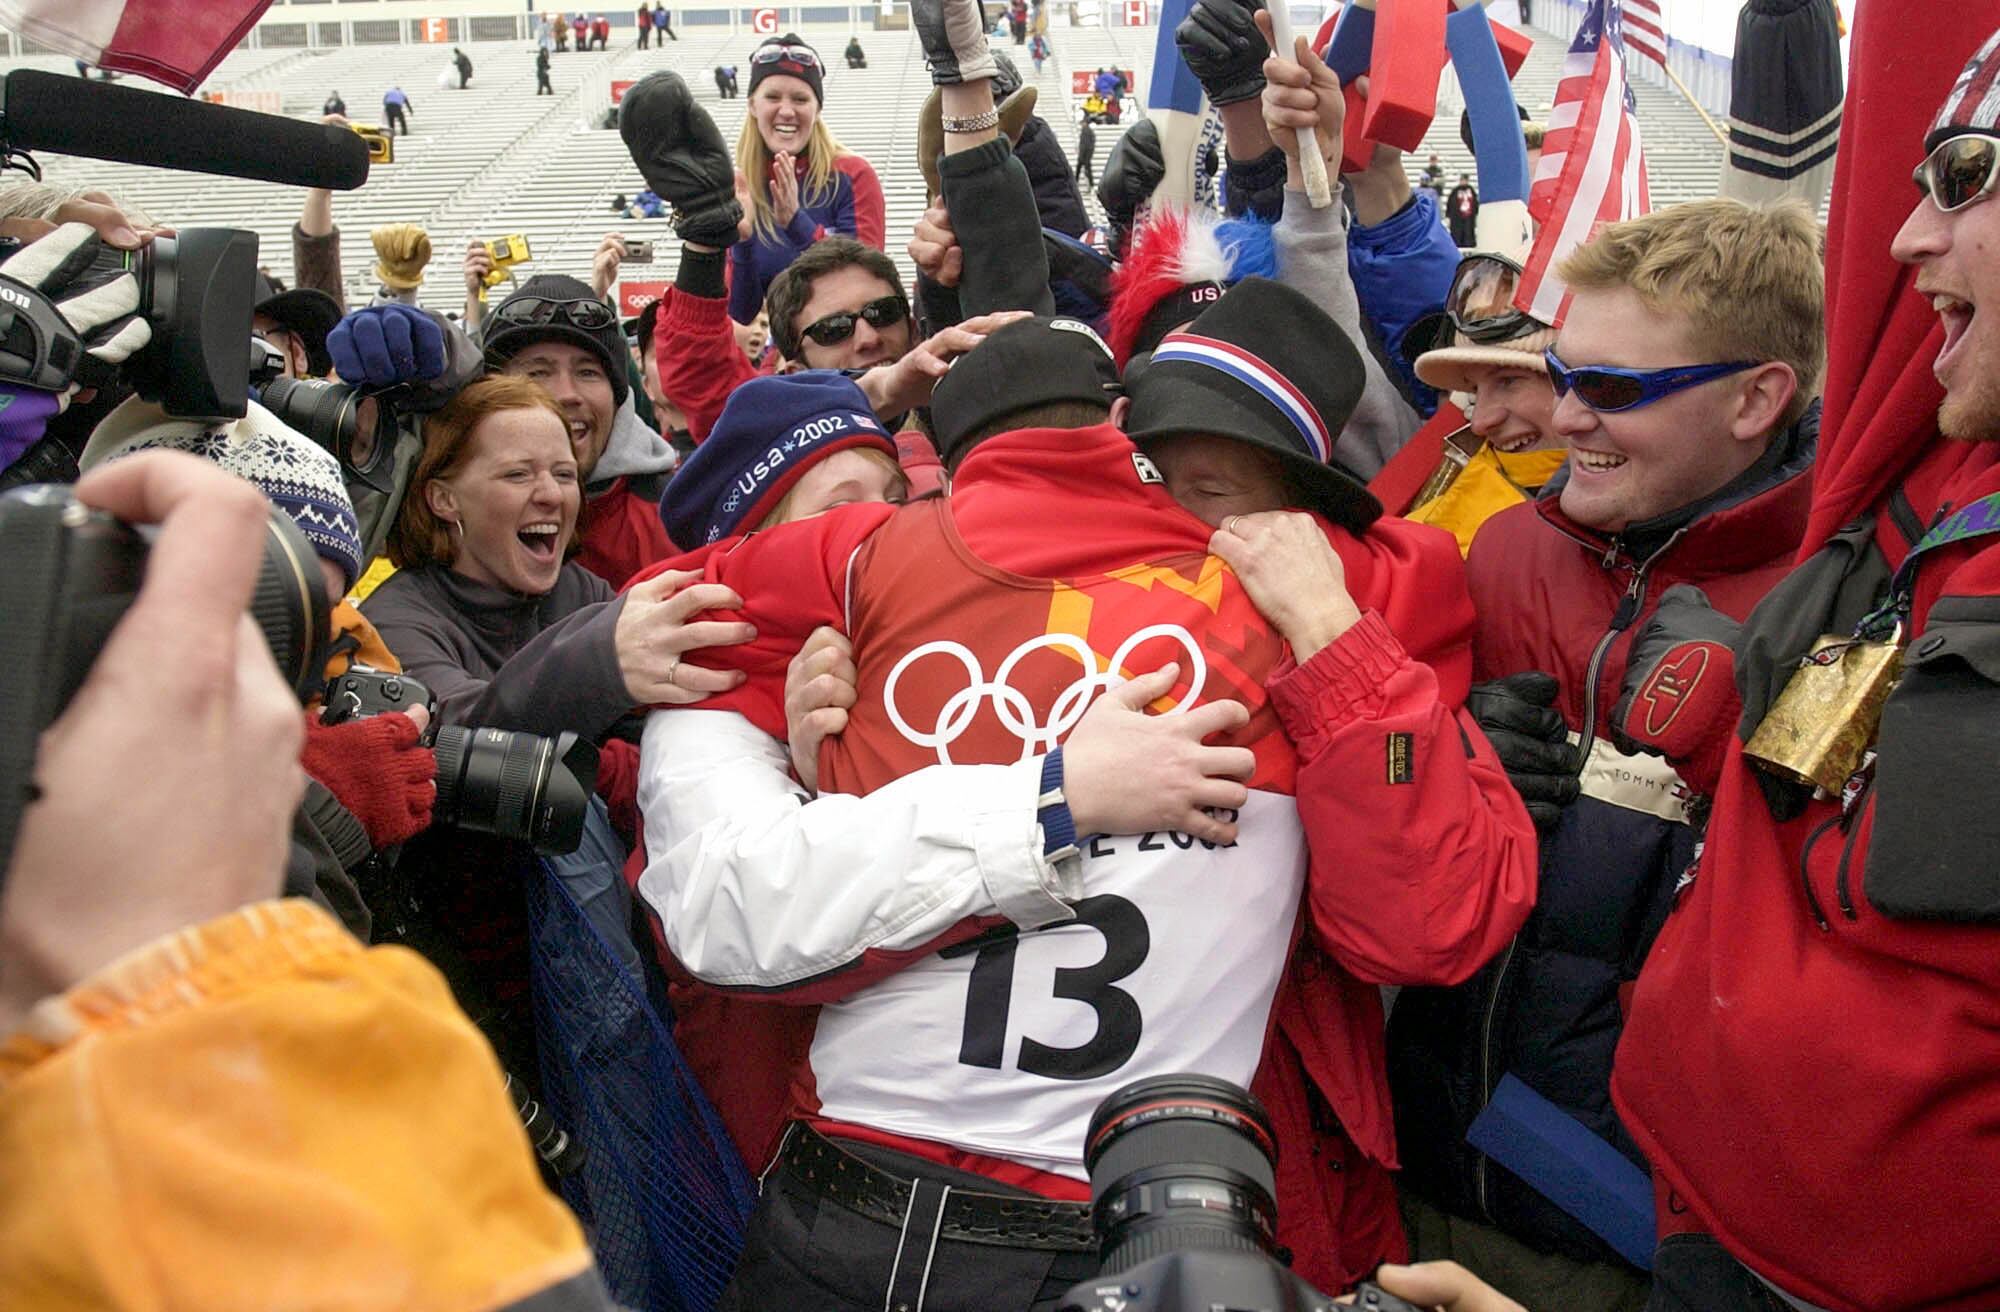 (Paul Fraughton | The Salt Lake Tribune) Joe Pack of the United States is hugged by his family and friends after his silver medal performance in the men’s aerials during the 2002 Winter Olympics at Deer Valley Resort, Feb. 19, 2002.